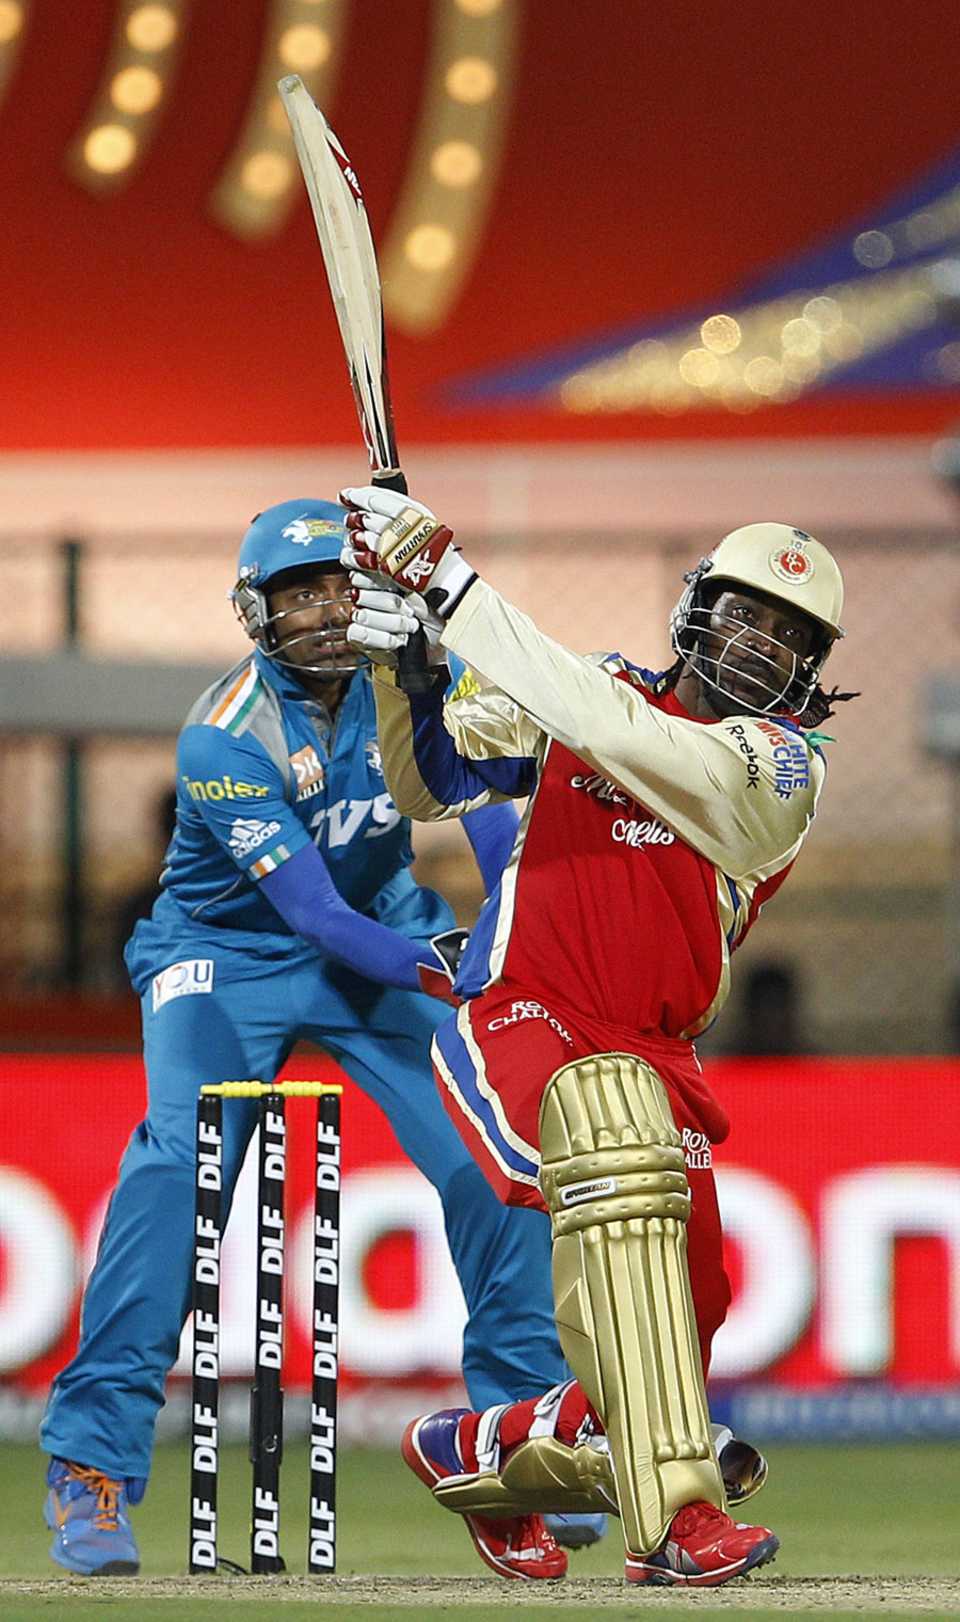 Chris Gayle slammed five sixes in an over